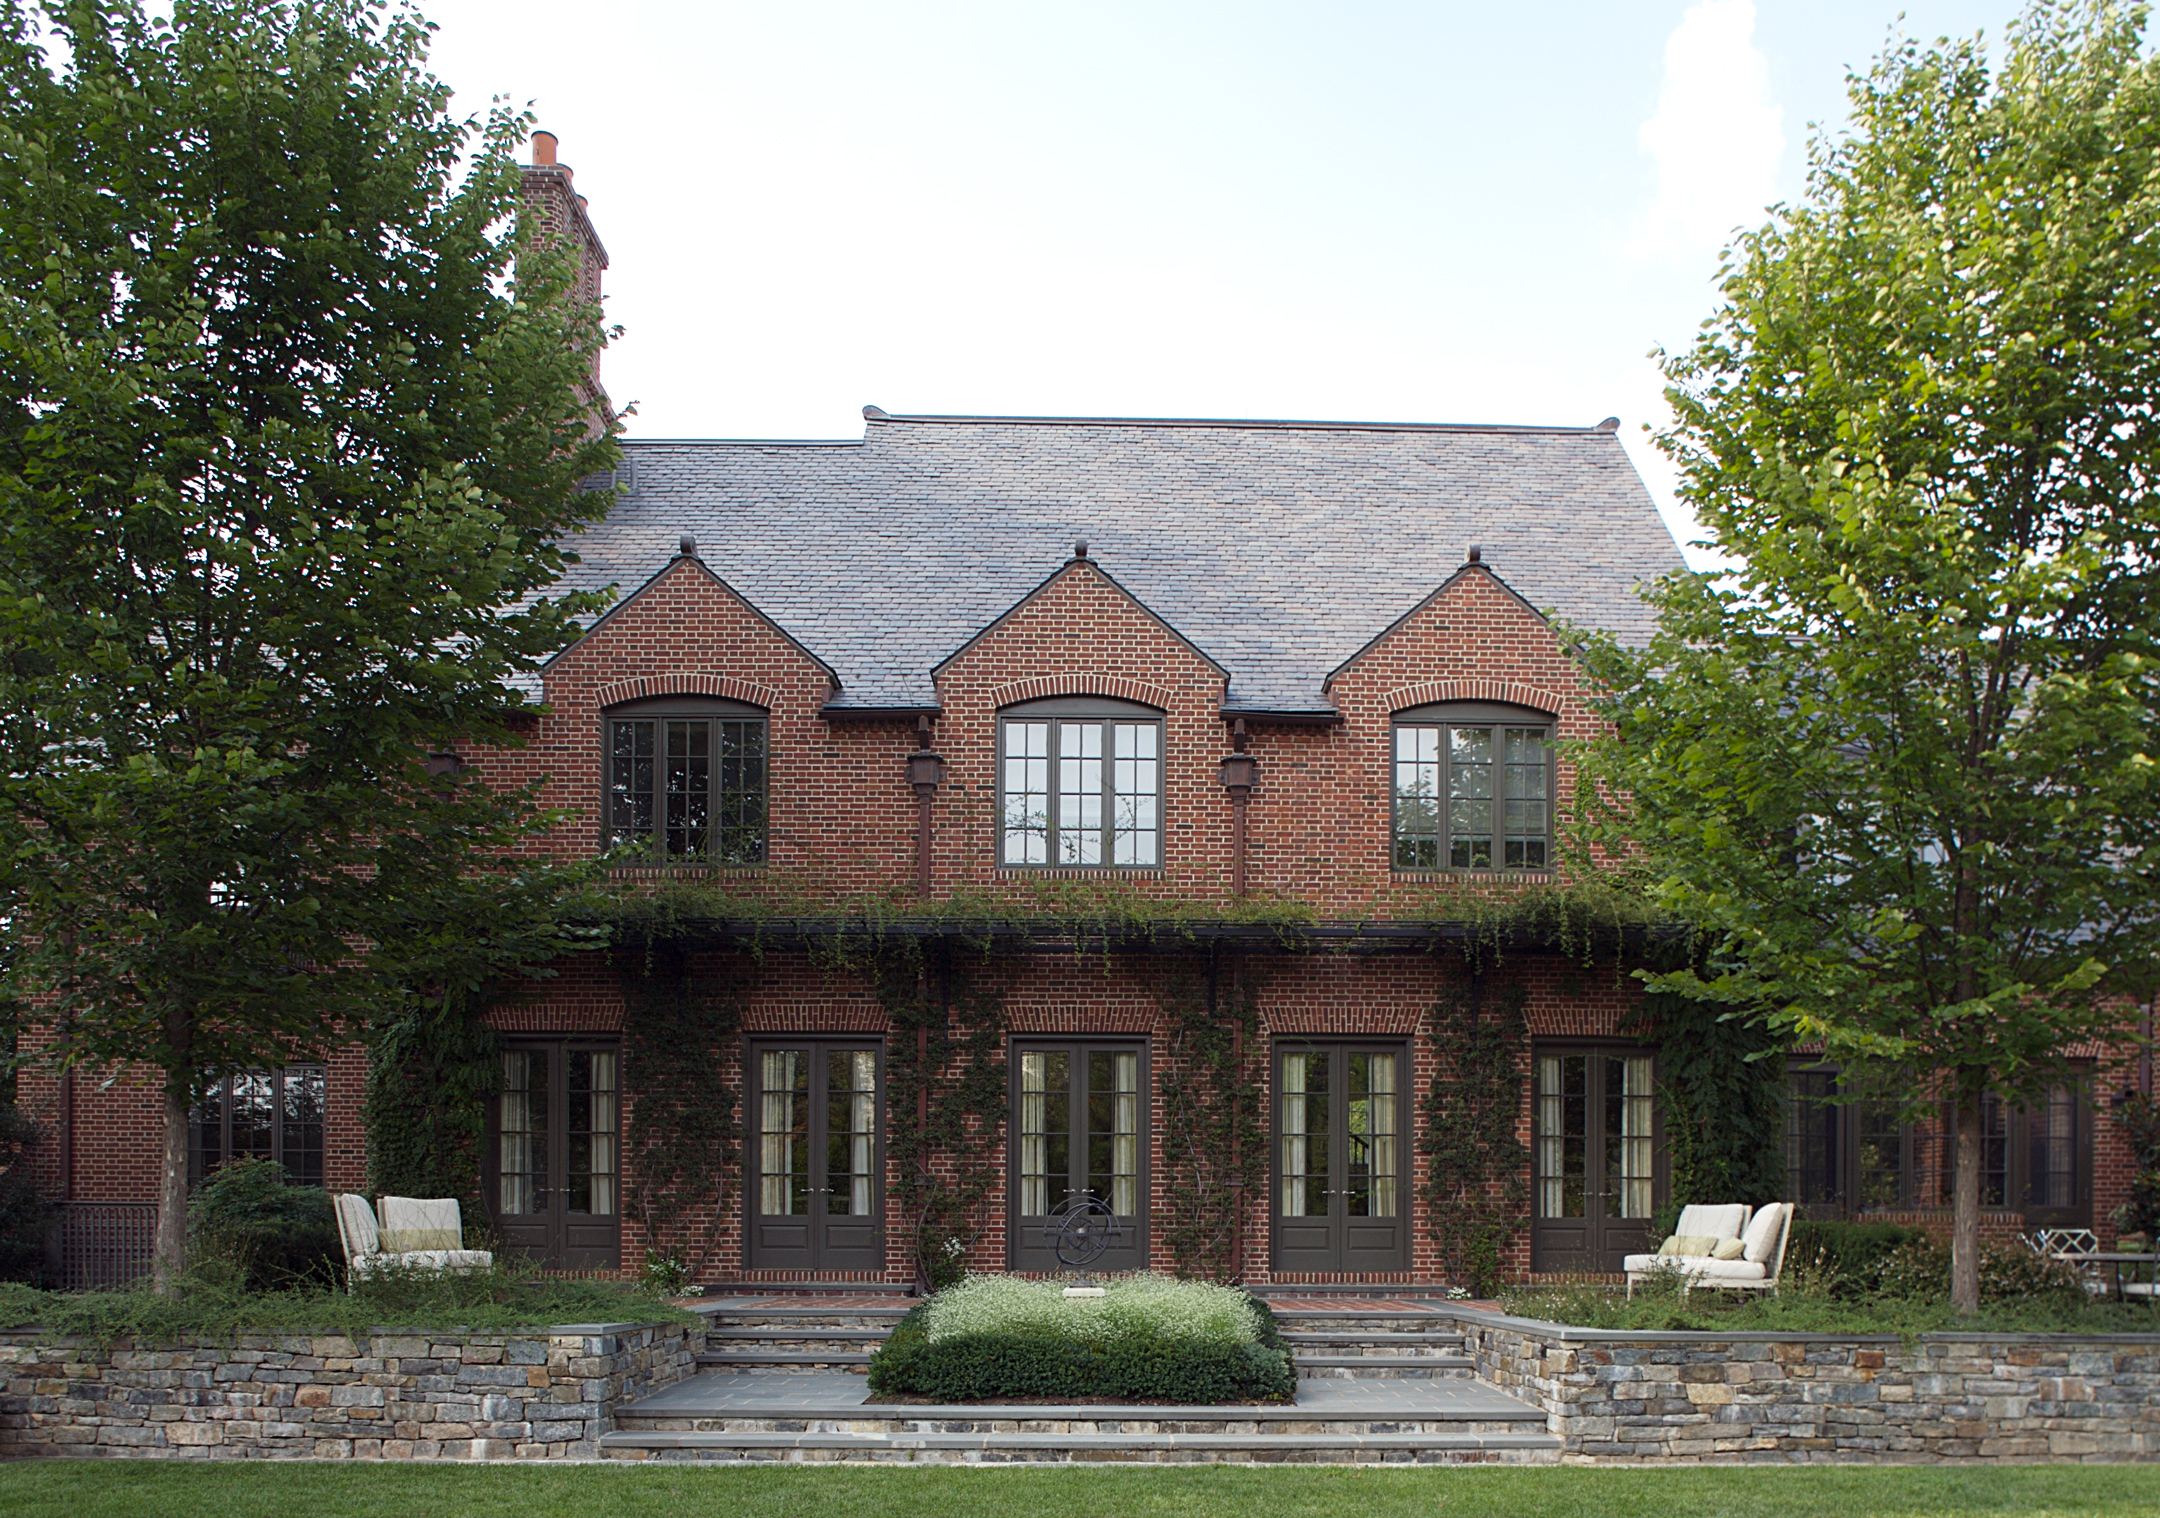   Project Location: &nbsp;Chevy Chase, Maryland  Completion: &nbsp;&nbsp;2006  General Contractor: &nbsp;&nbsp;Gibson &amp; Associates  Project Architect: &nbsp;Jones &amp; Boer  Primary Material Palette:&nbsp; &nbsp;brick, bluestone, fieldstone, box